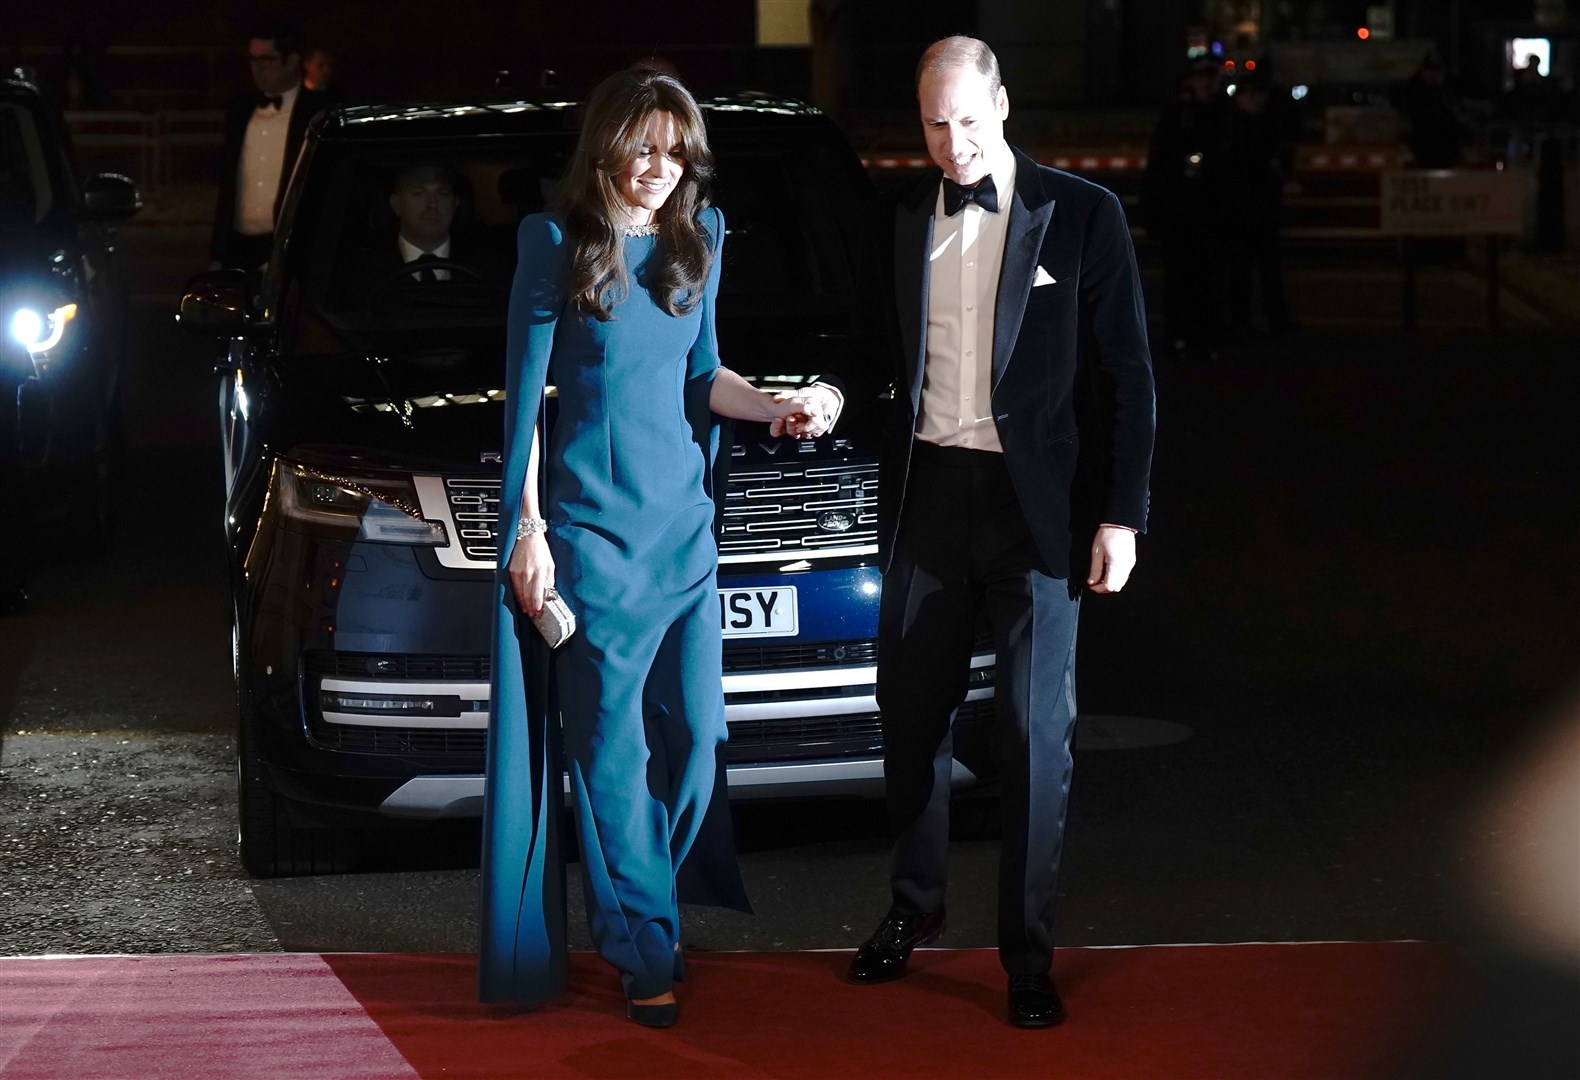 The Prince and Princess of Wales faced questions about Omid Scobie’s book as they arrived for the Royal Variety Performance (Aaron Chown/PA)